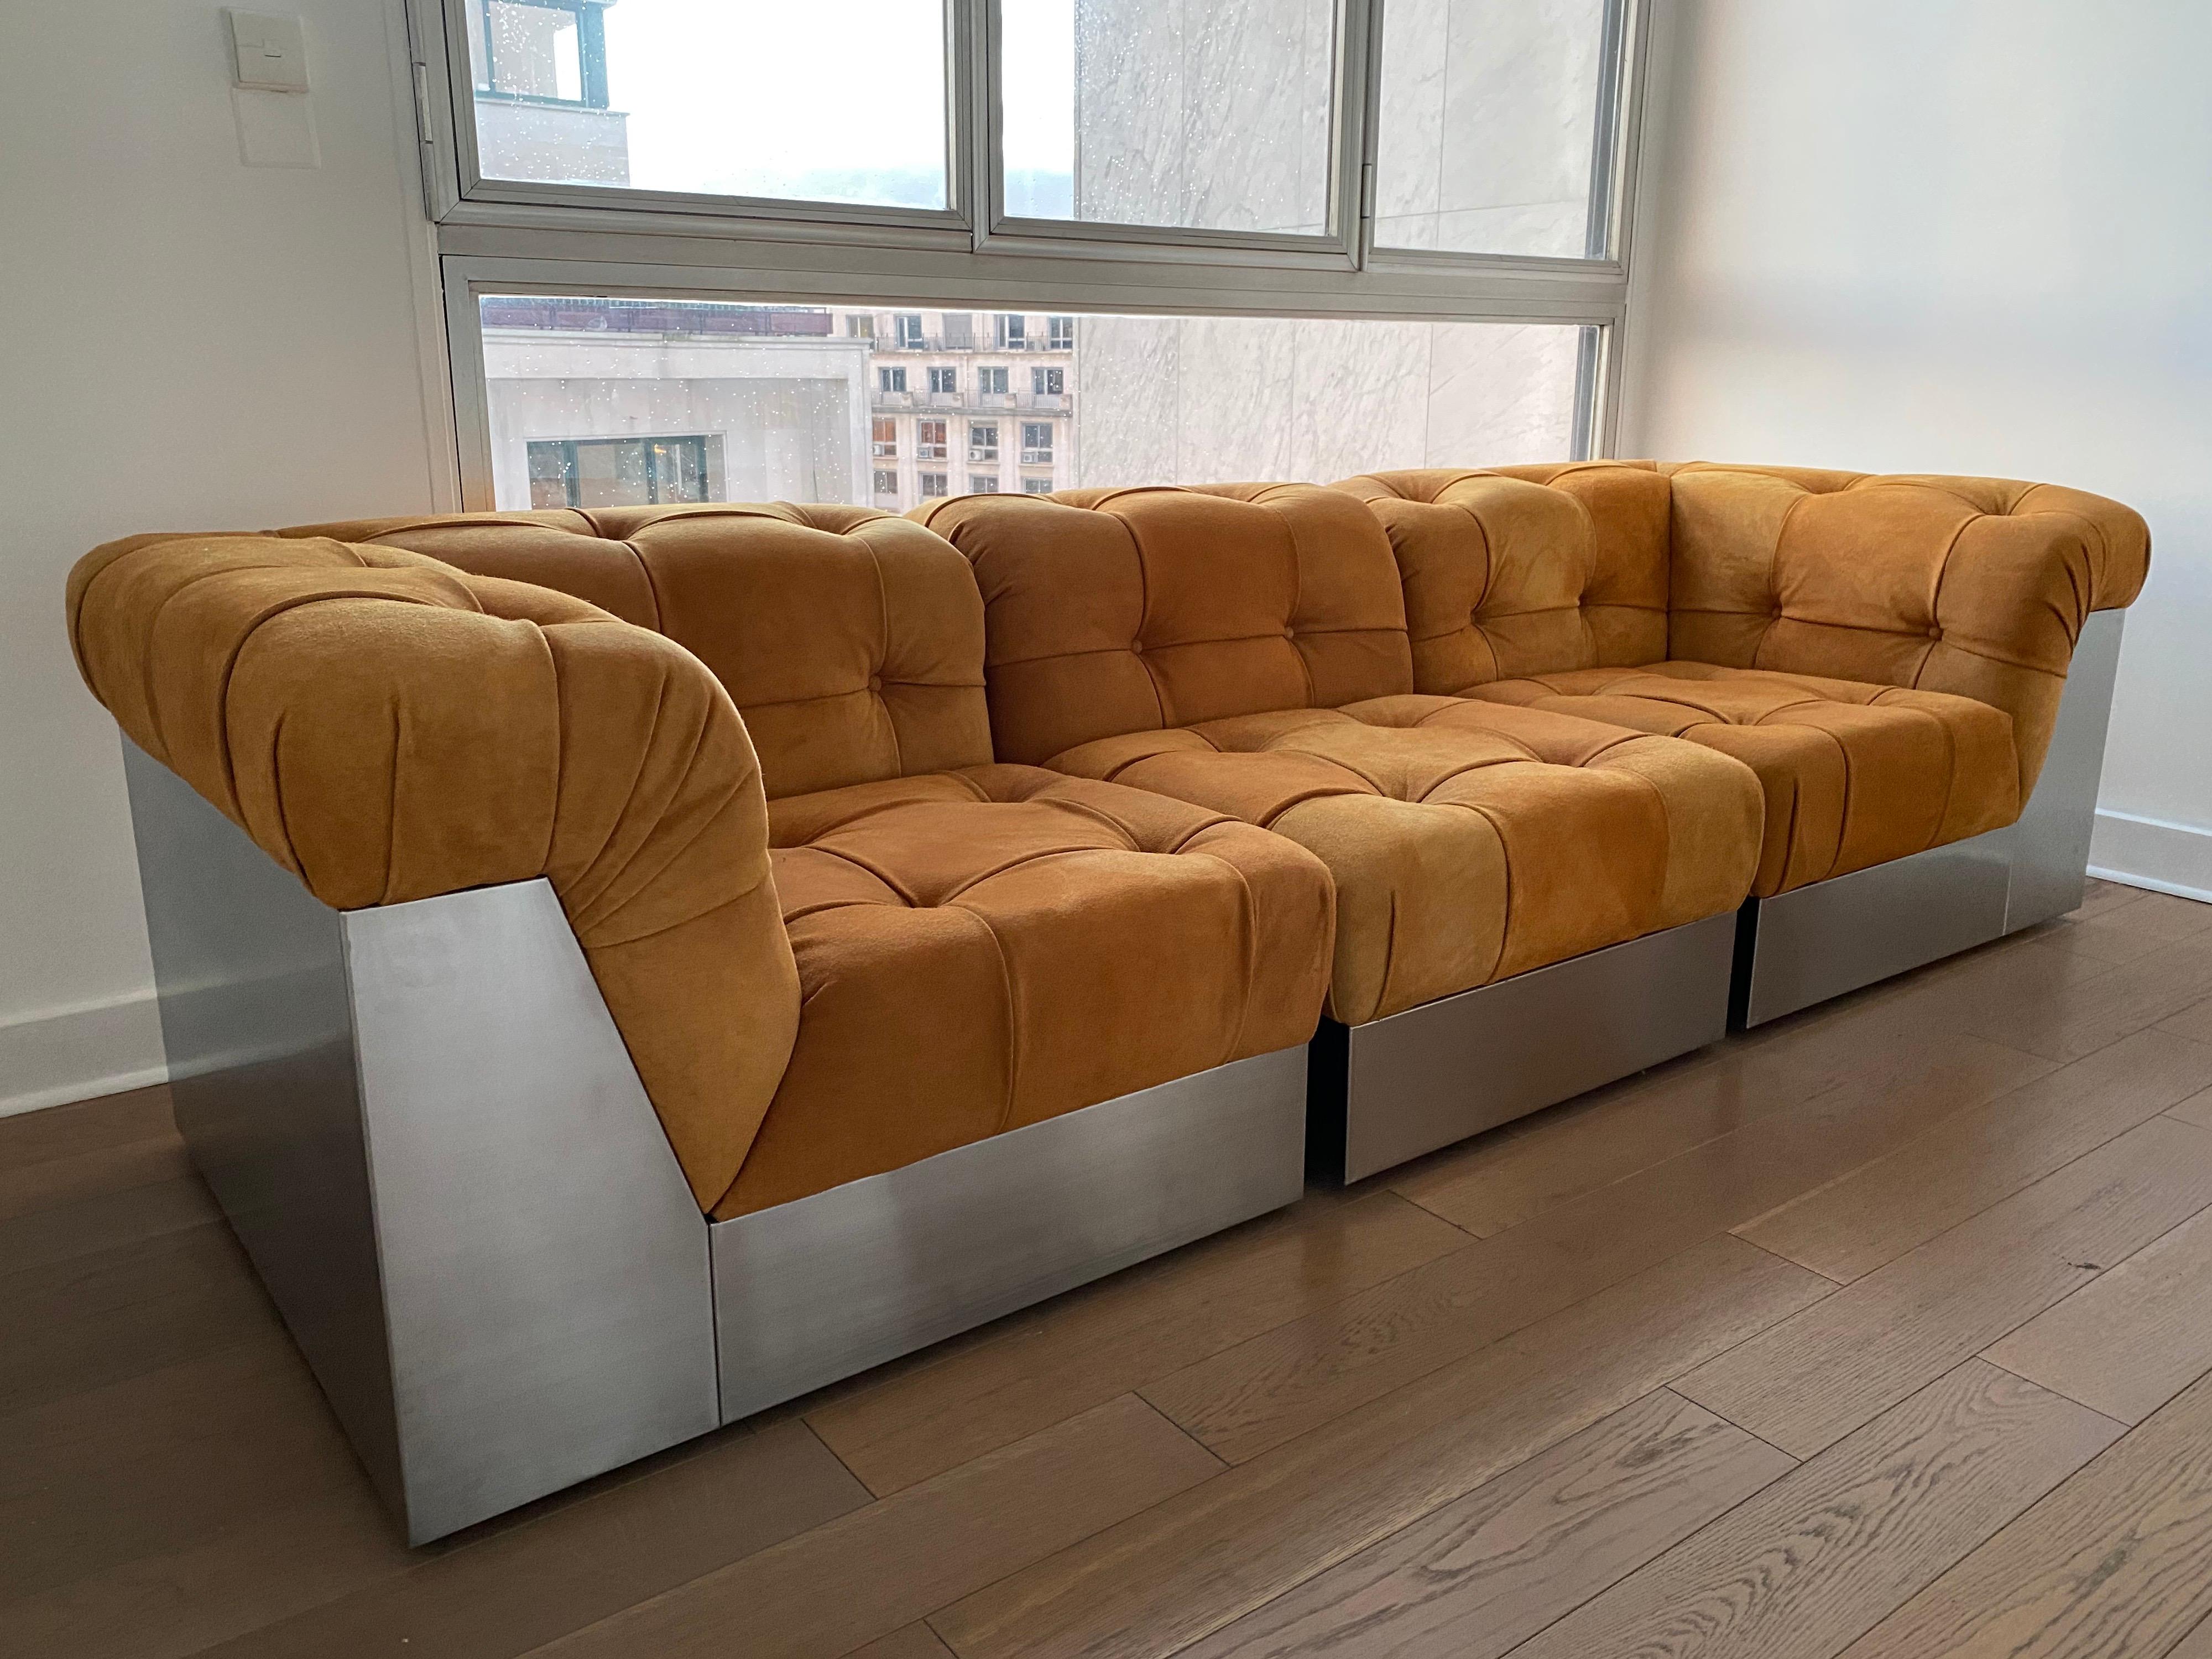 Three seater sofa in stainless steel and suede leather.
Designed by Giorgio Montani for souplina, France, circa 1970
Perfect condition entirely reuphostered in suede.
Stainless steel in perfect condition.